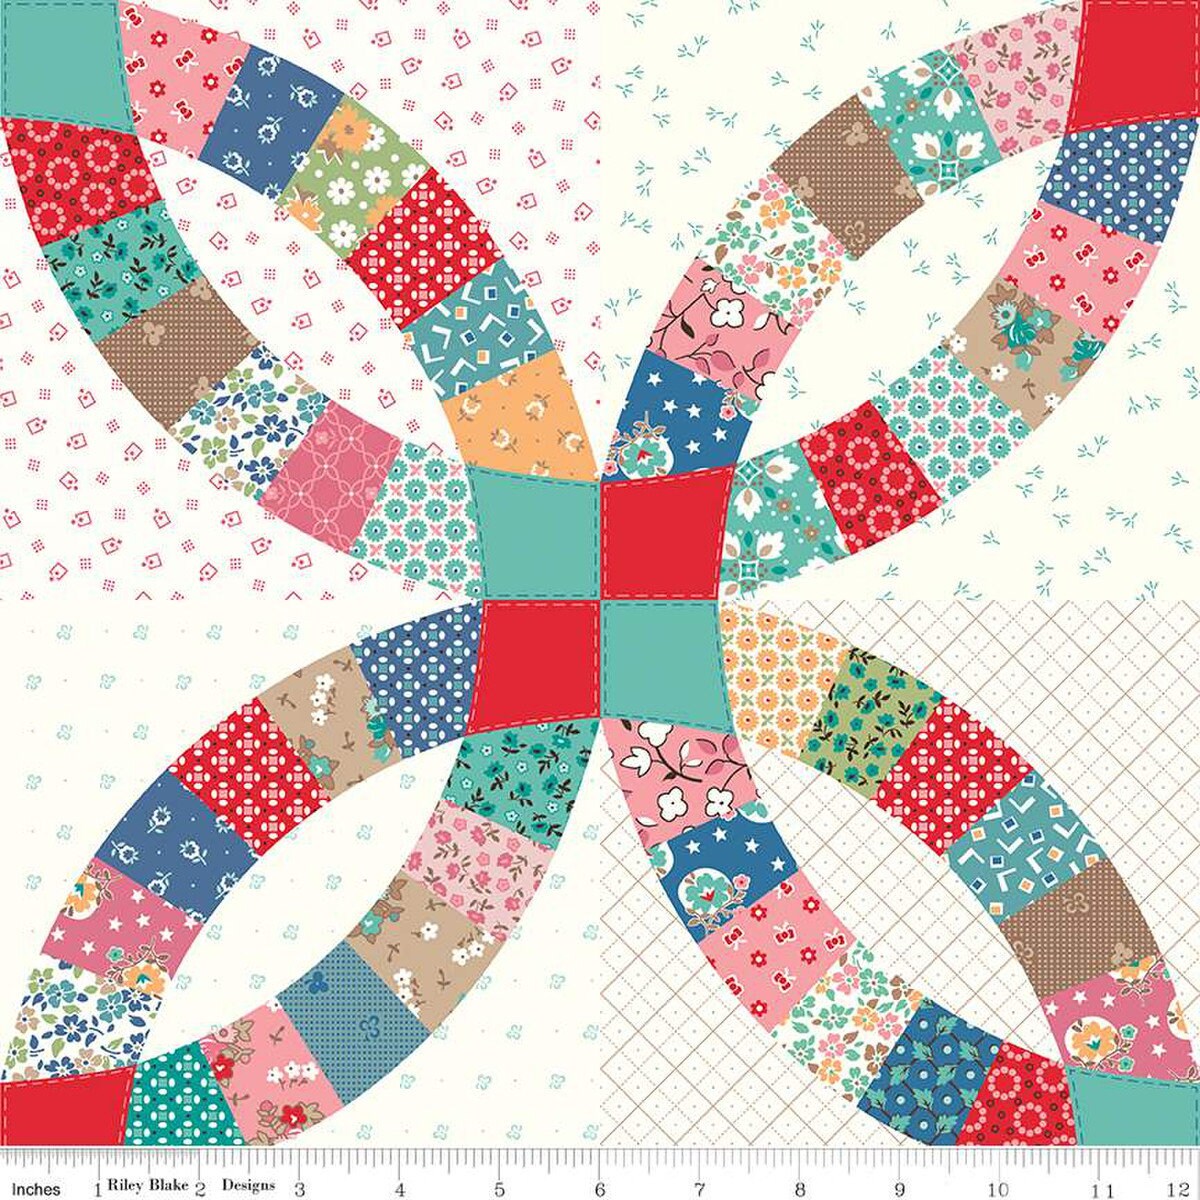 bright loops of vintage style patchwork on a white background